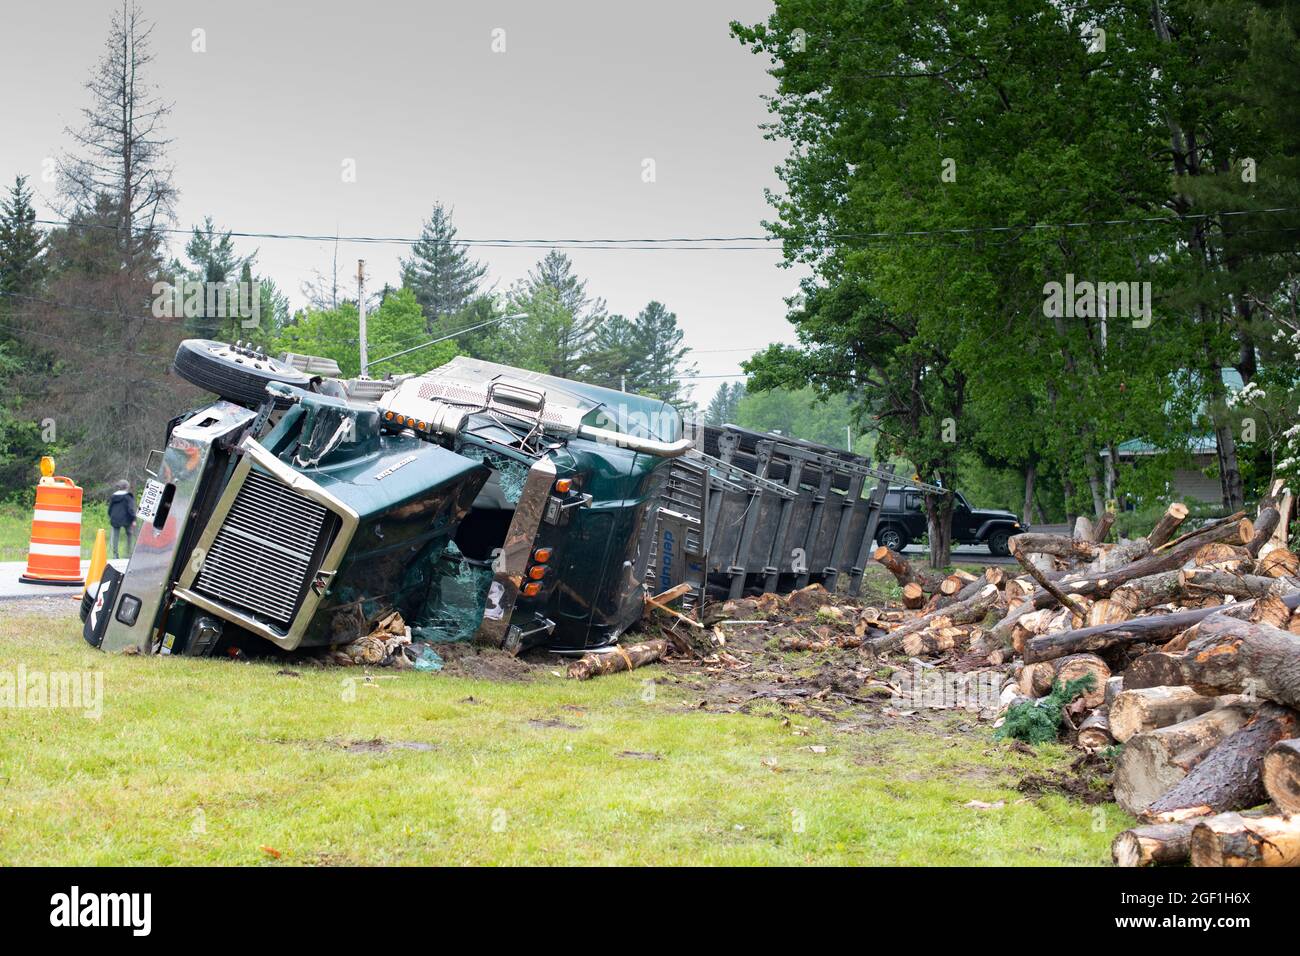 A log hauling truck accident in Hoffmeister, NY USA involving a logging truck rolling on its side and dumping a load of logs on the front of a house. Stock Photo